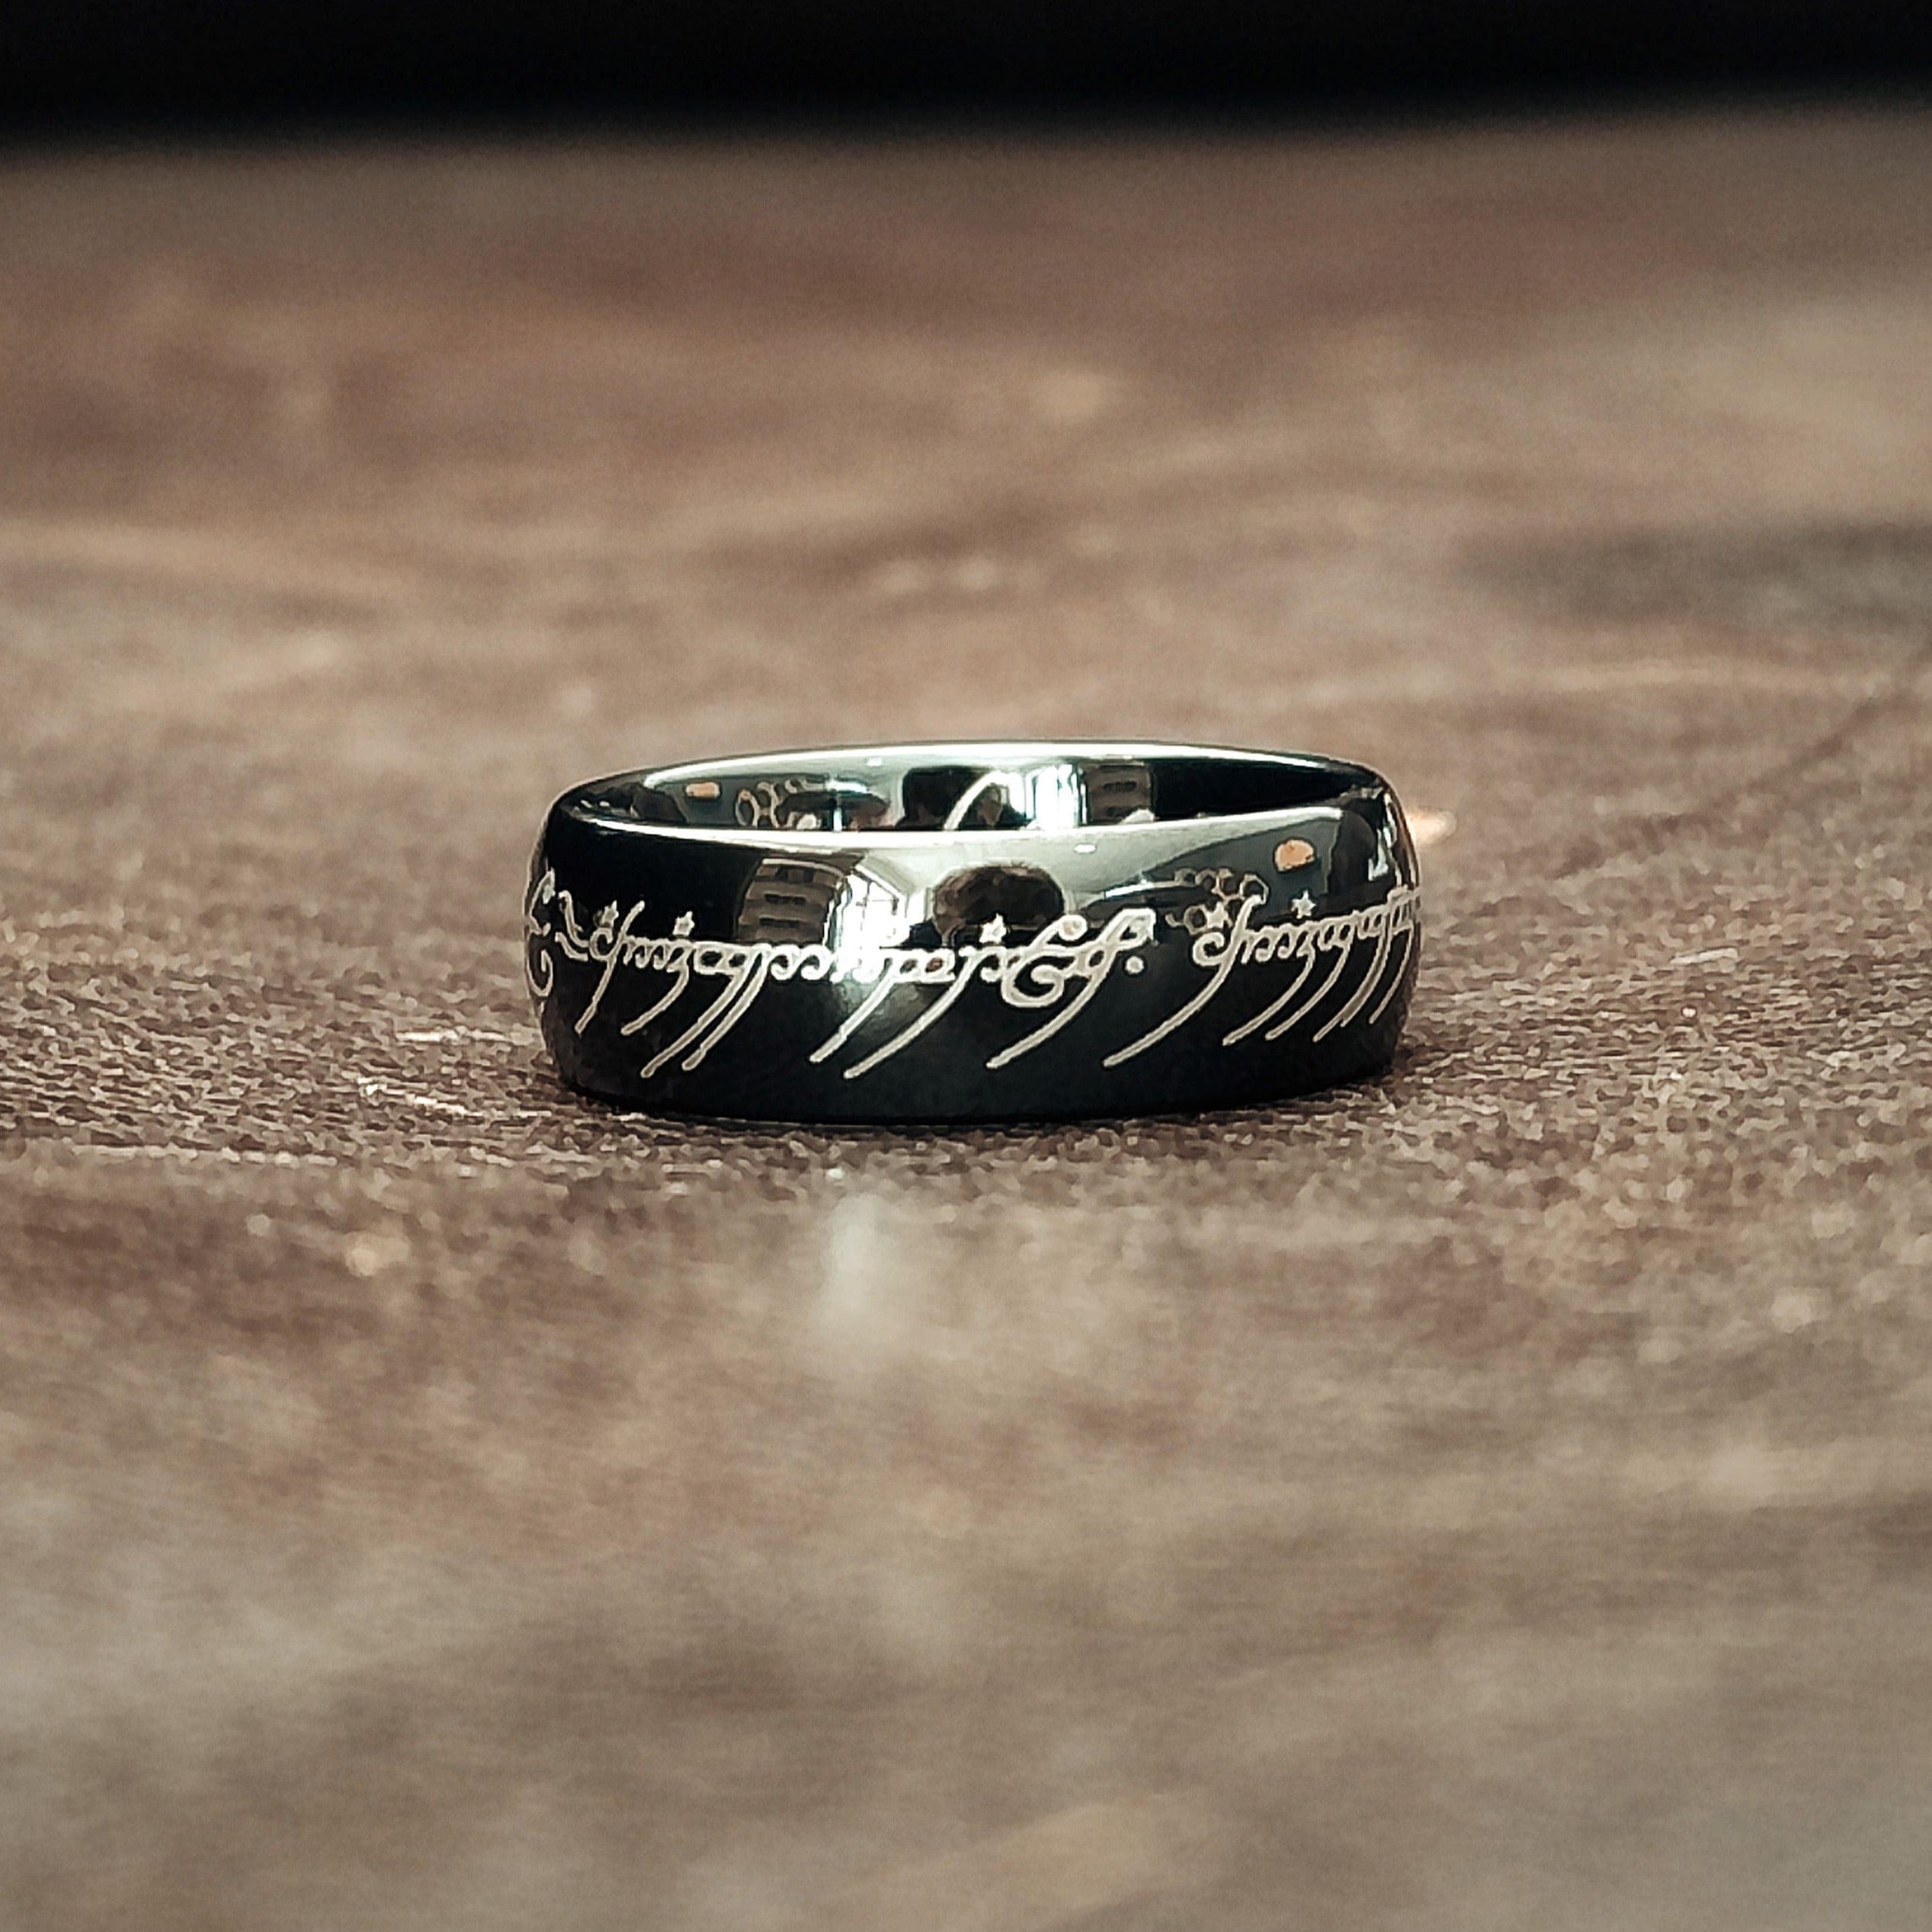 Lord Of The Rings - Black Men's Tungsten Ring